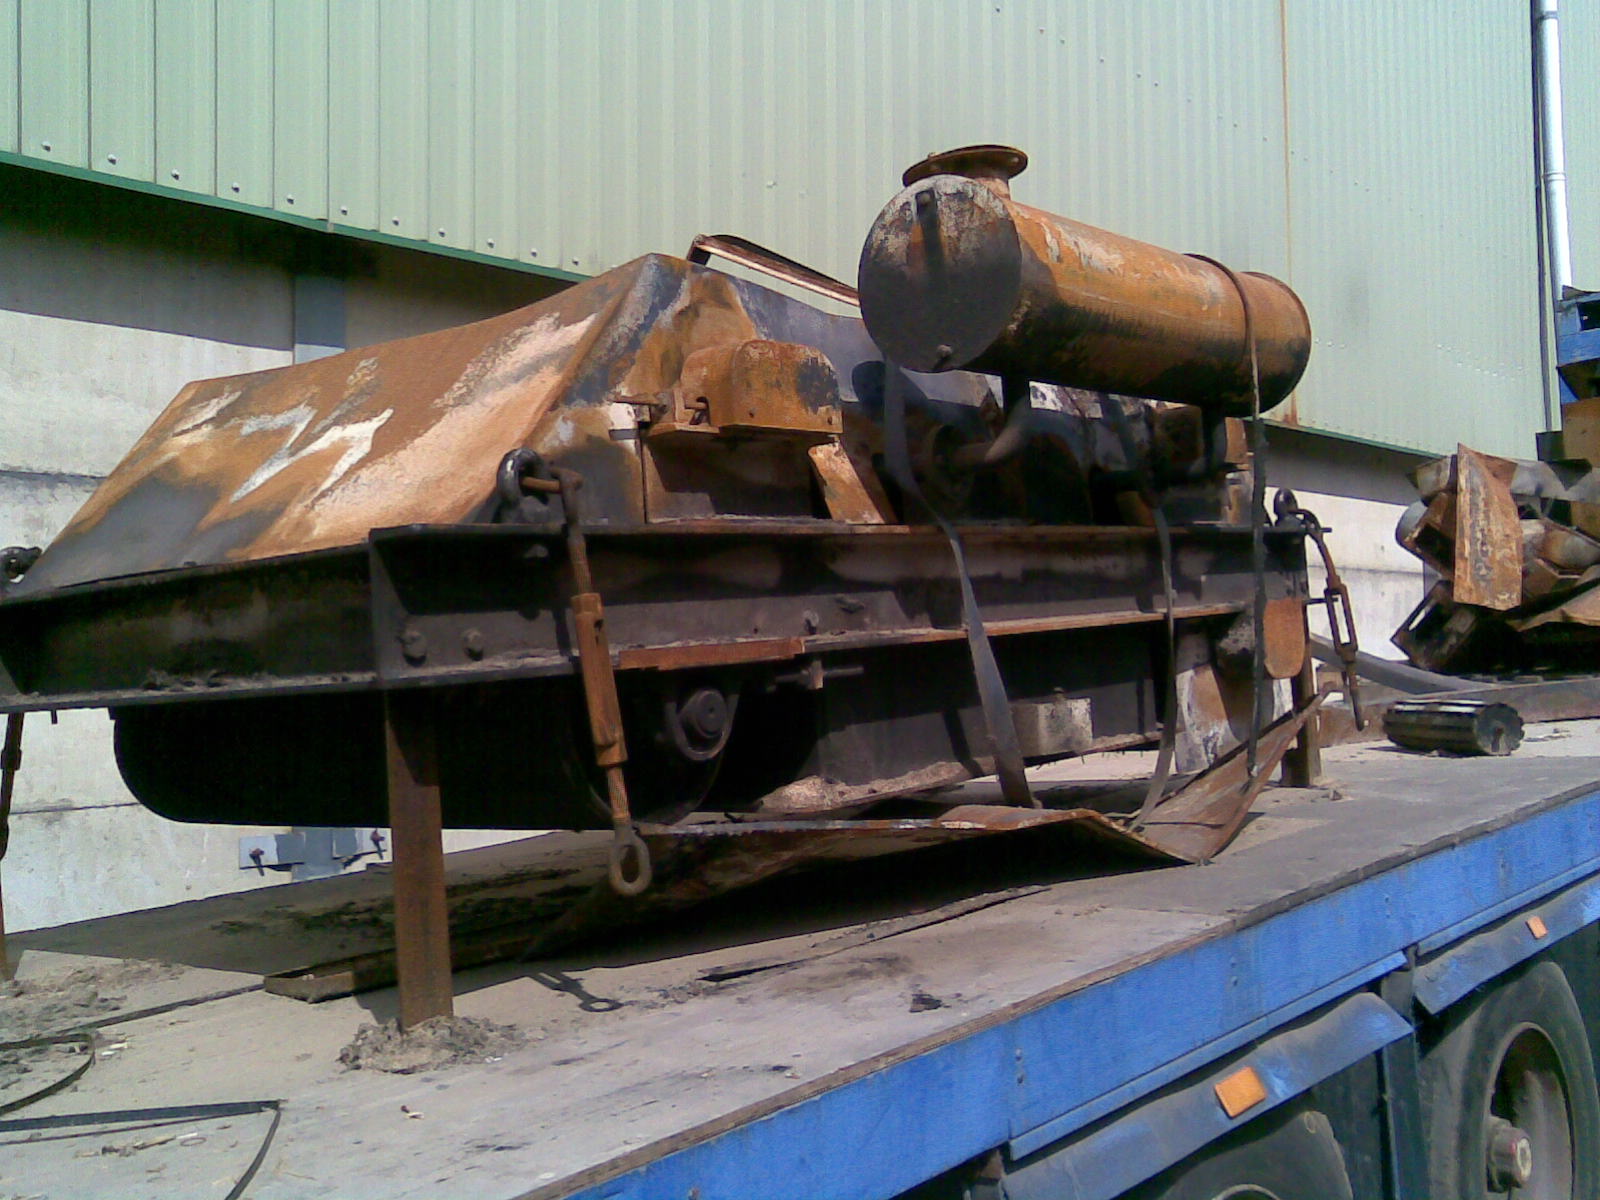 Electro overband after fire prior to refurbishment